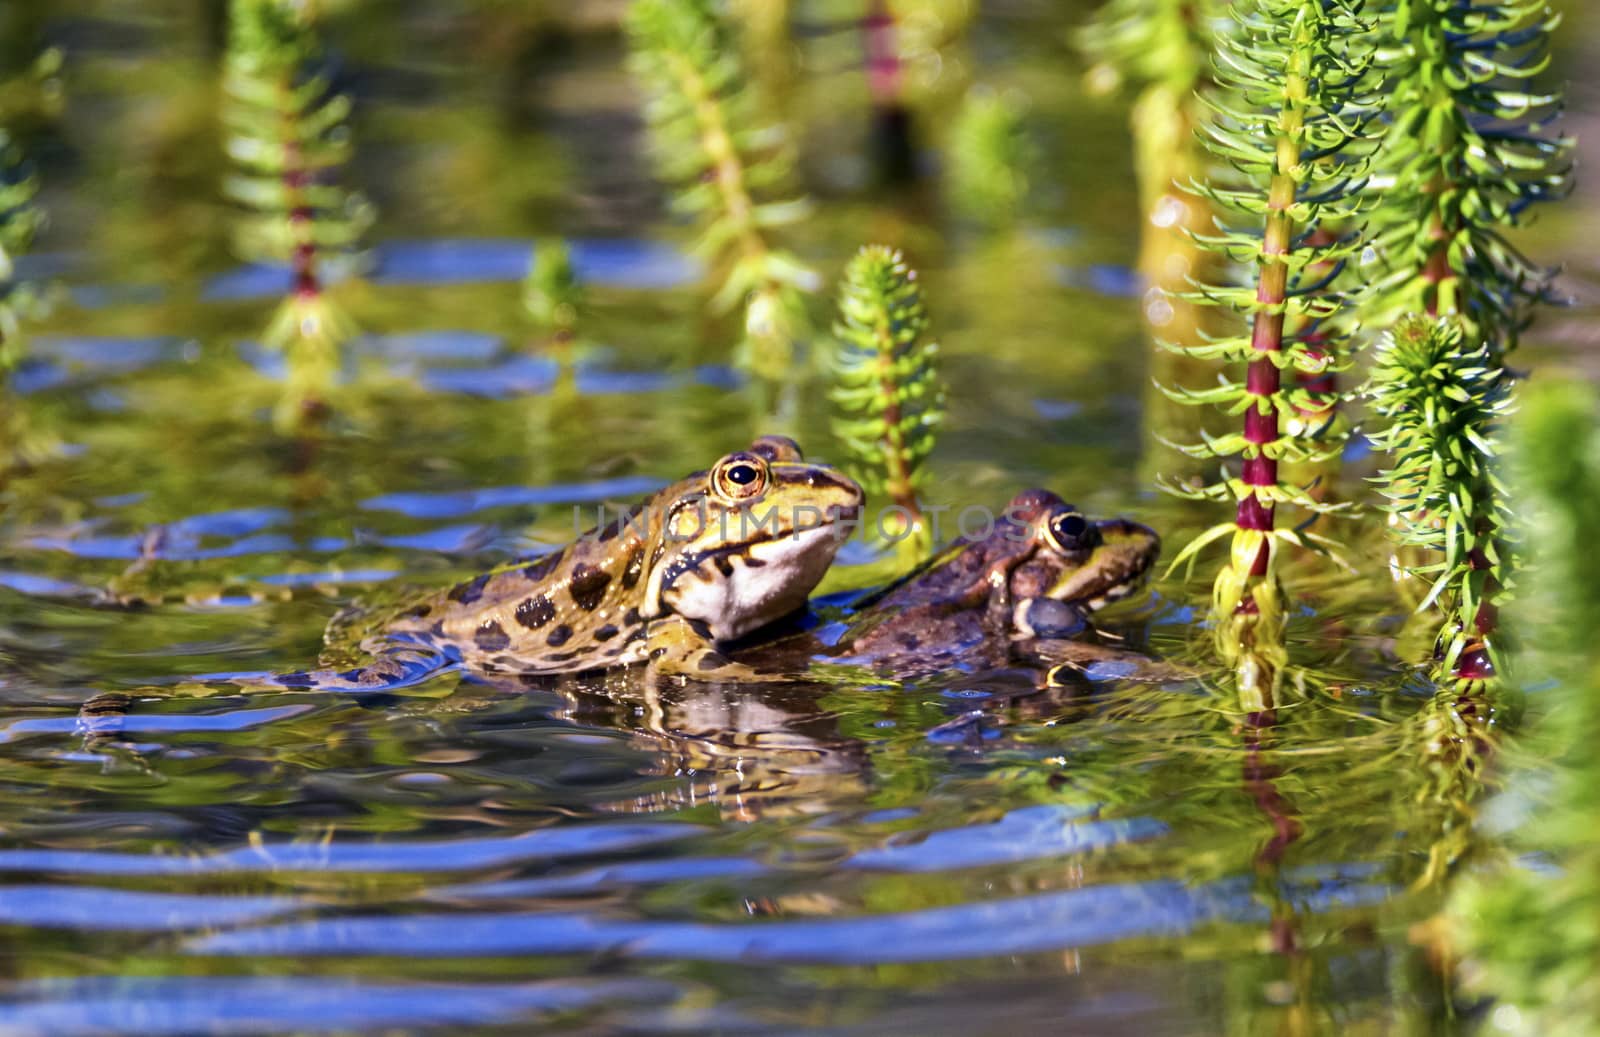 Frog mating in a pond by day